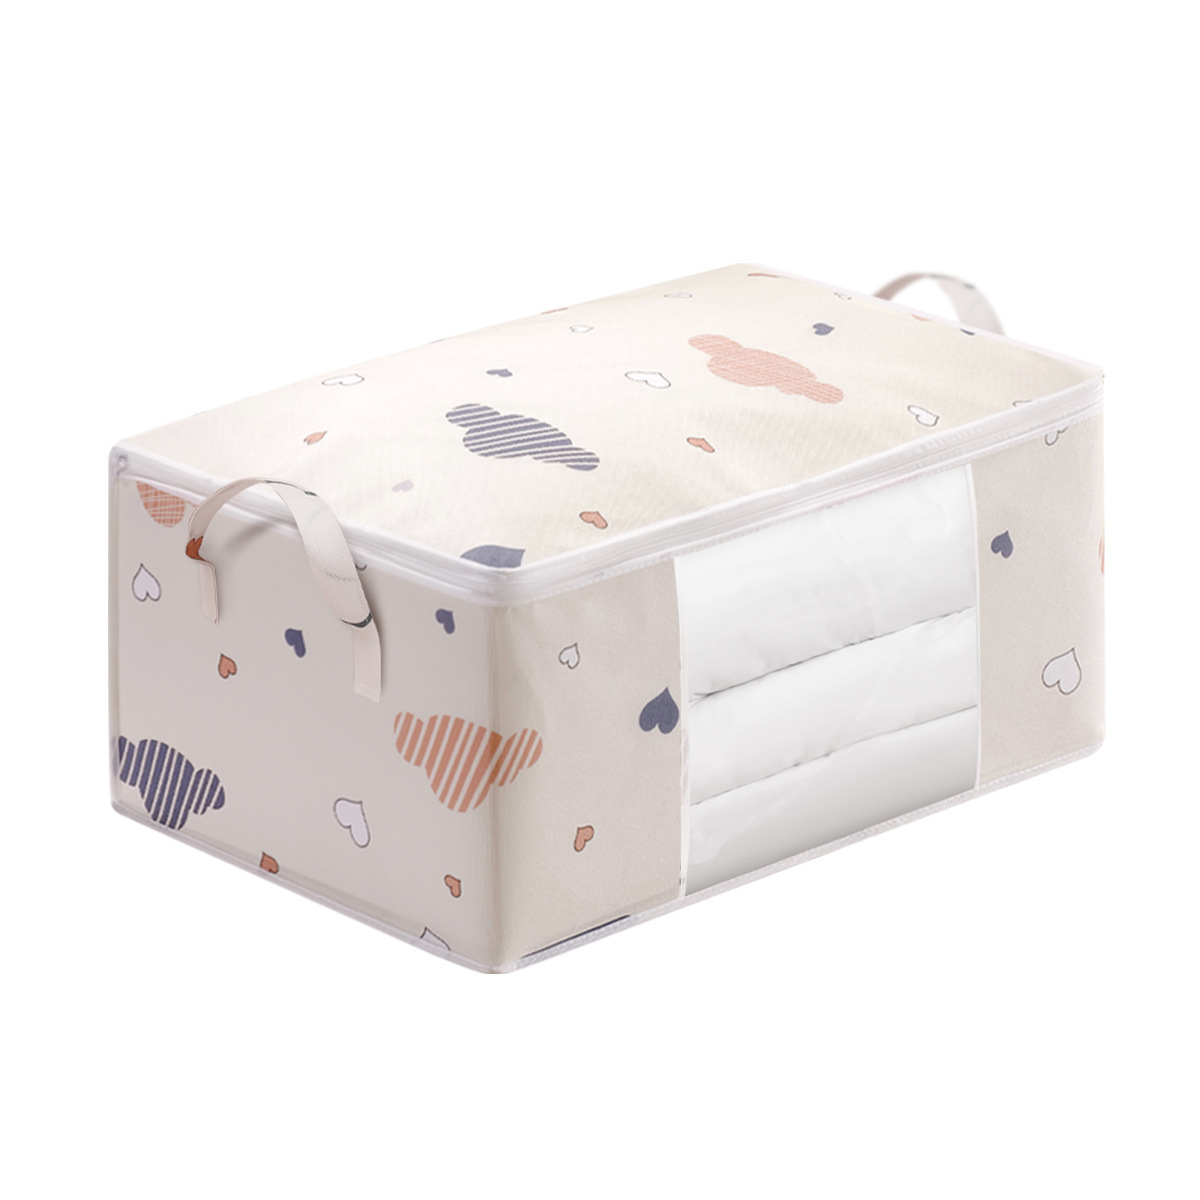 Quilt storage bag with handle window multi-functional dust bag home moving doggy bag Finishing bag storage bag